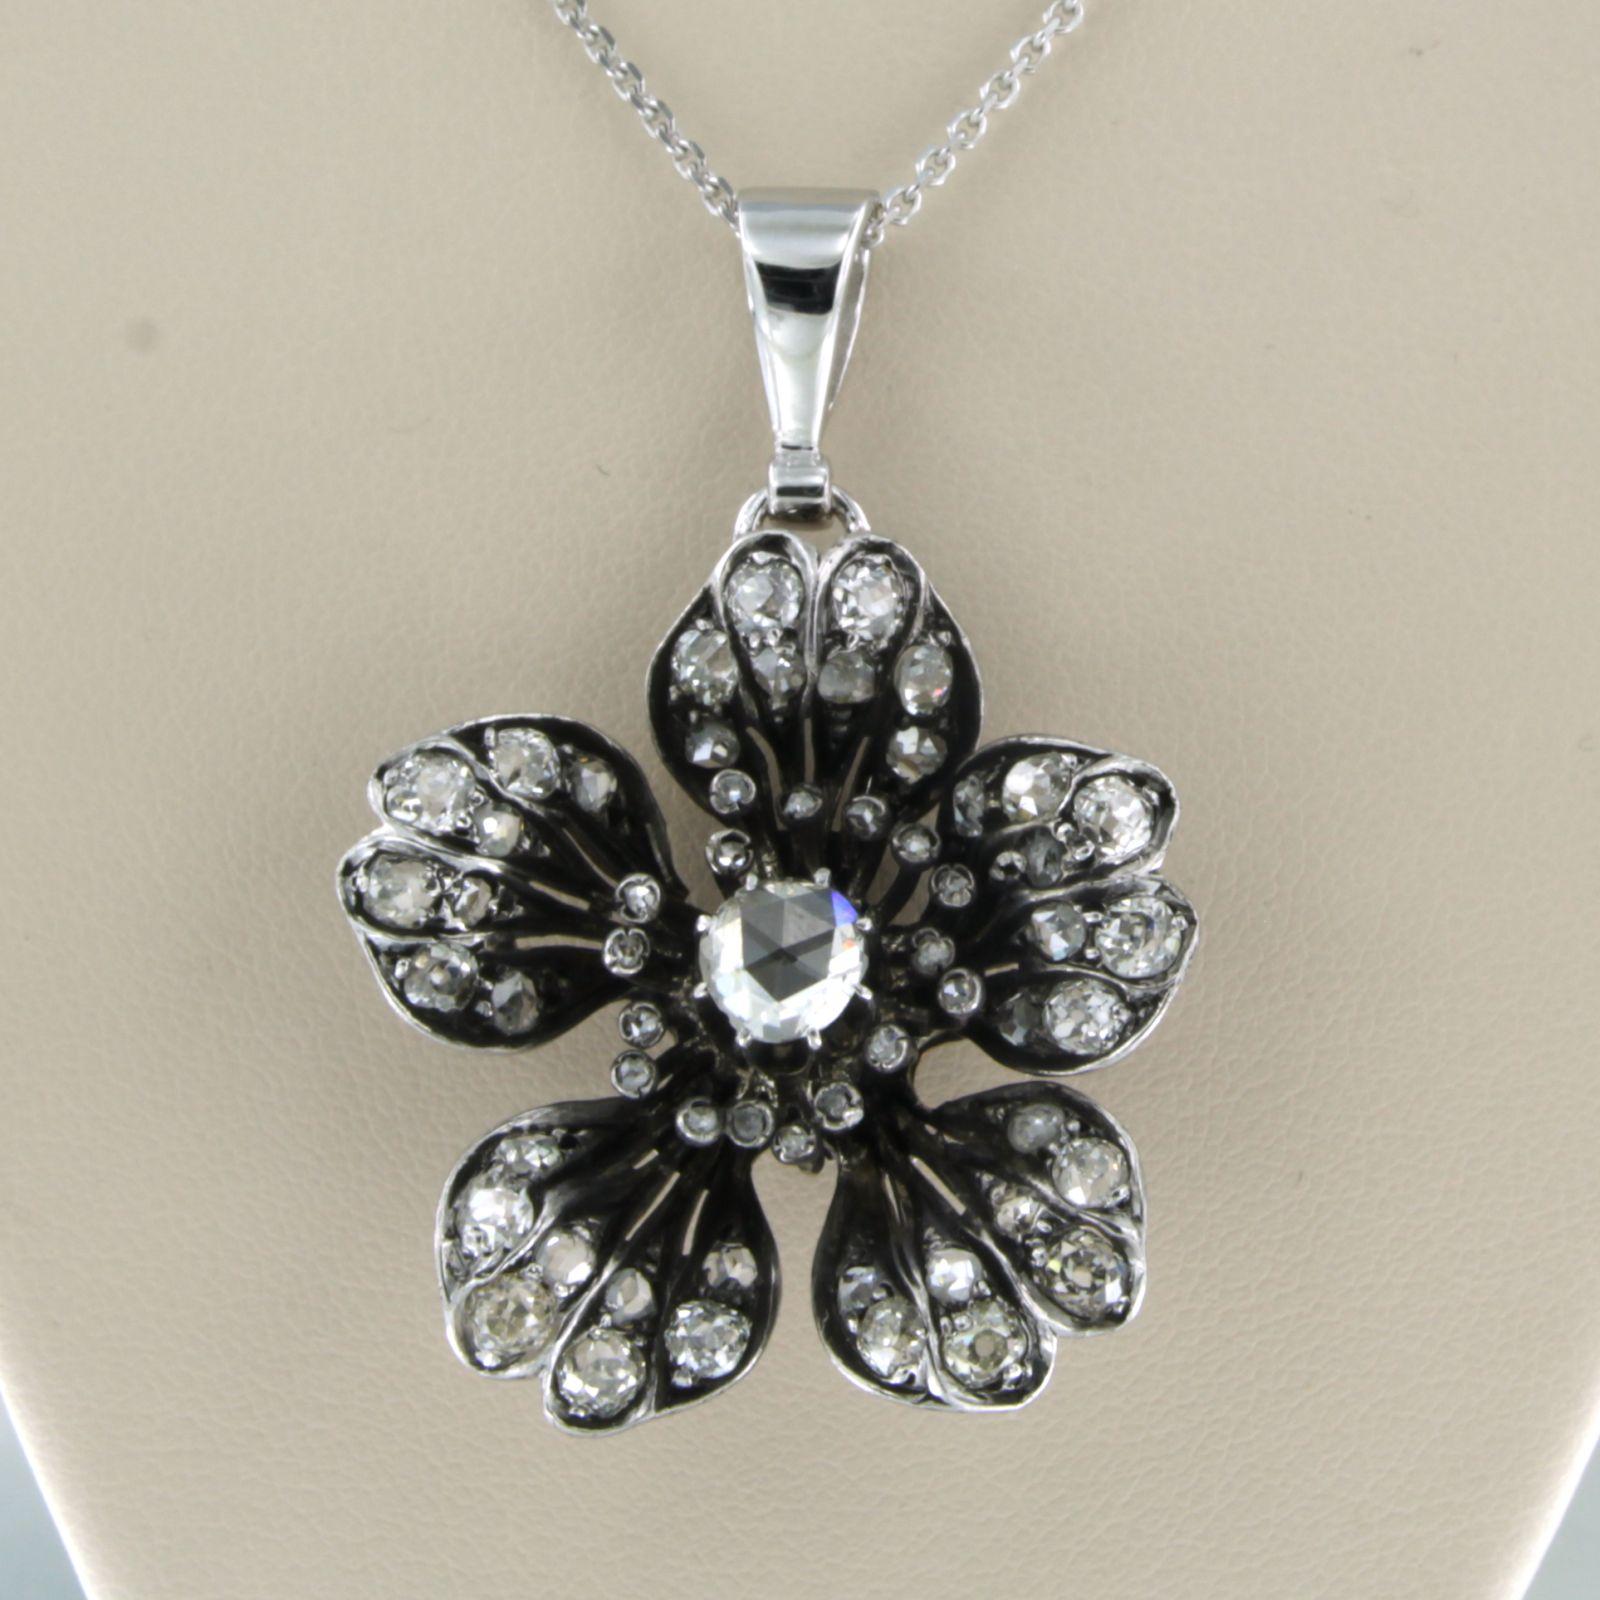 14k white gold necklace with a gold and silver pendant set with old mine cut and rose diamonds. 3.00ct - 45cm long

detailed description:

the necklace is 45 cm long and 1.0 mm wide.

The pendant is 4.6 cm high and 3.2 cm wide.

weight: 14.8